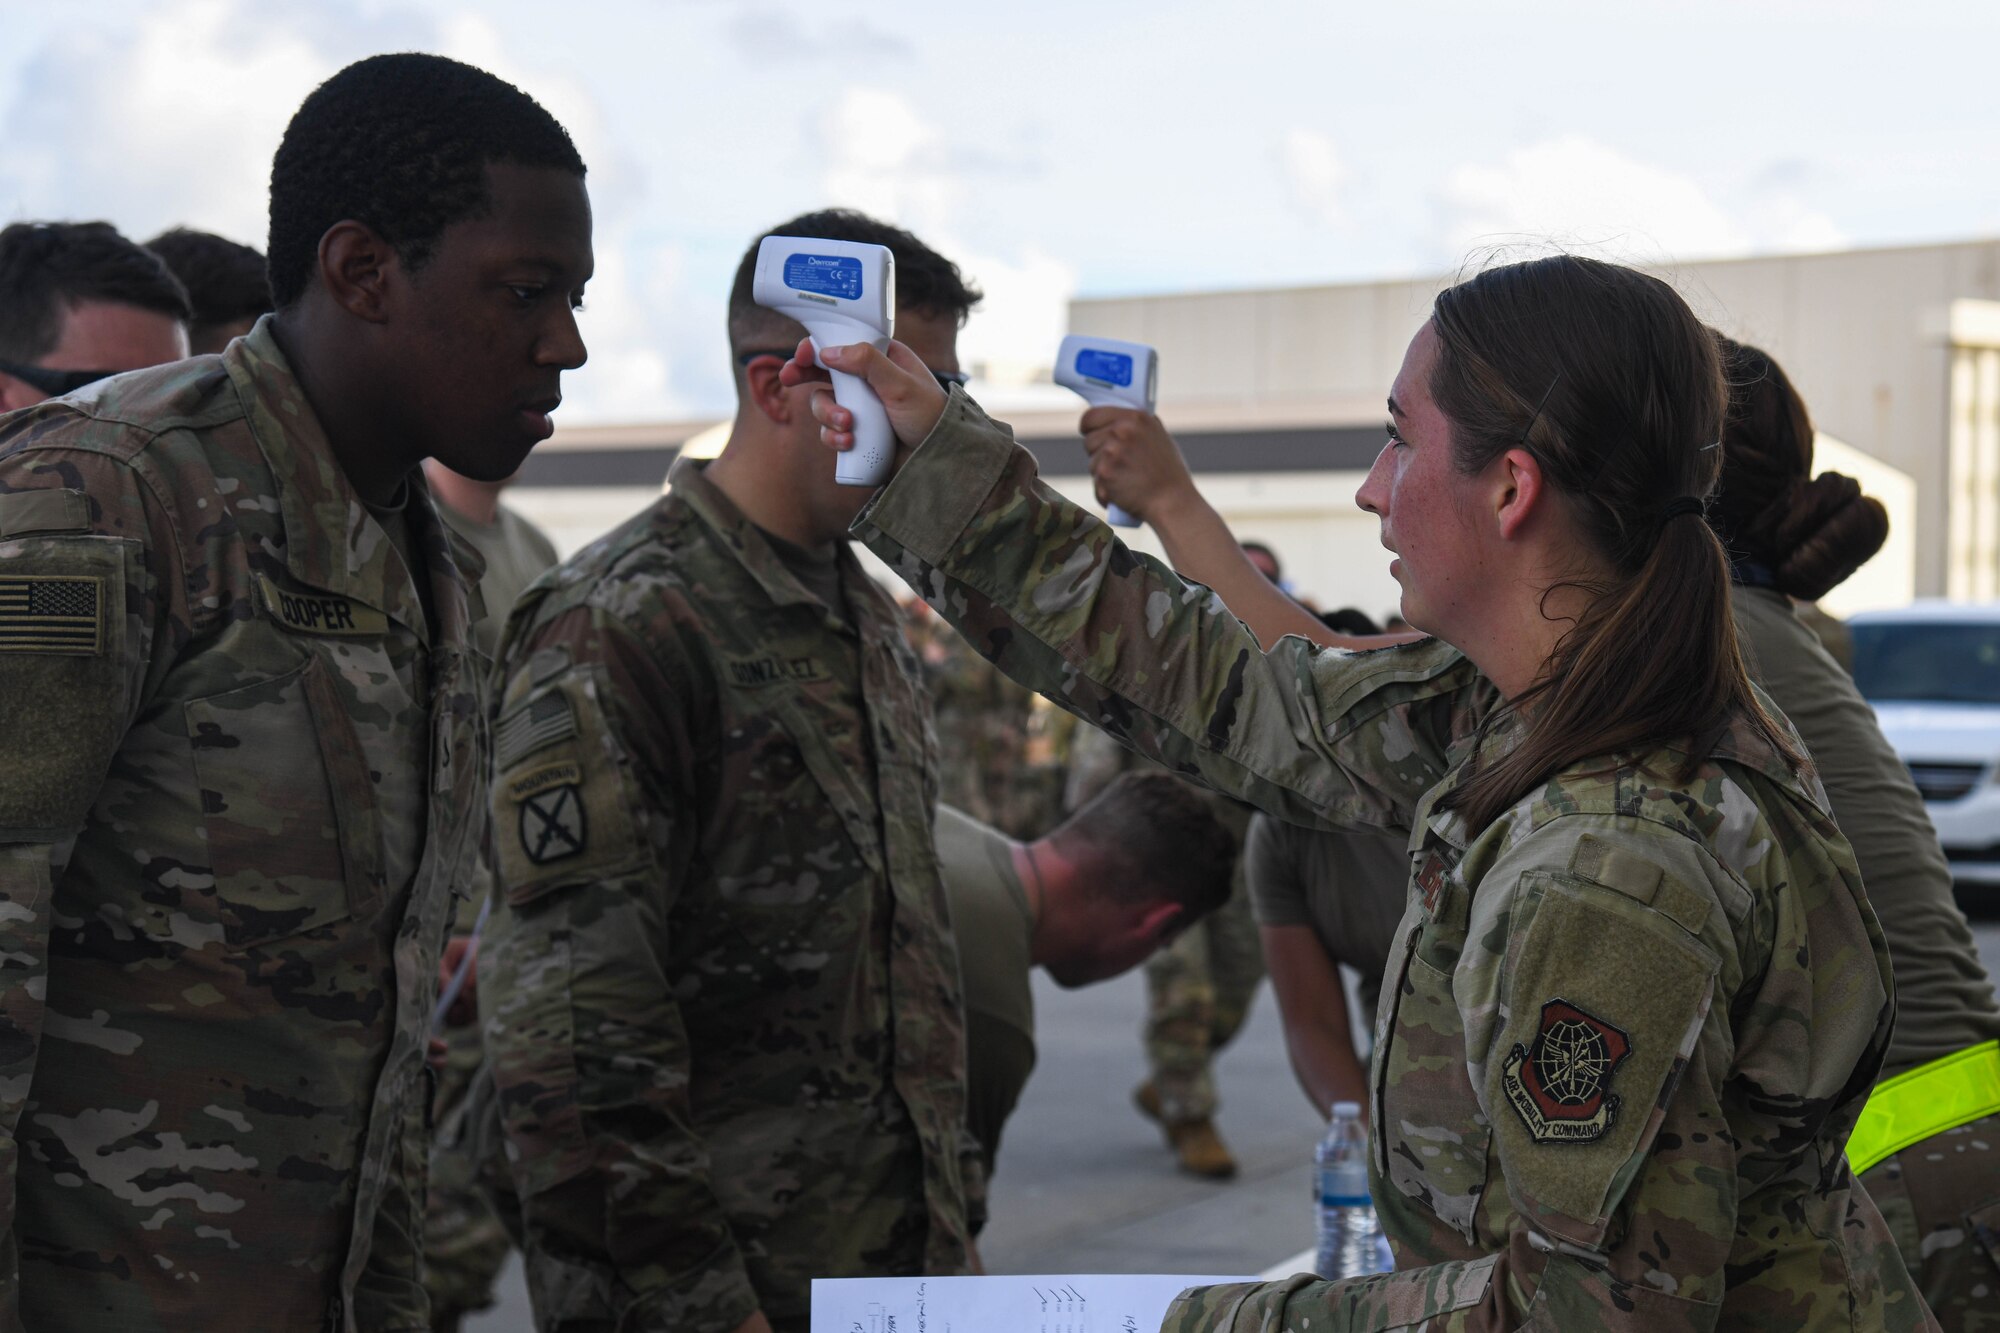 U.S. Air Force Airmen assigned to the 628th Medical Group take temperatures as a part of in-processing for the U.S. Army Soldiers assigned to the 82nd Airborne Division, Pope Army Airfield, N.C., to board a C-17 Globemaster III at Joint Base Charleston, S.C.